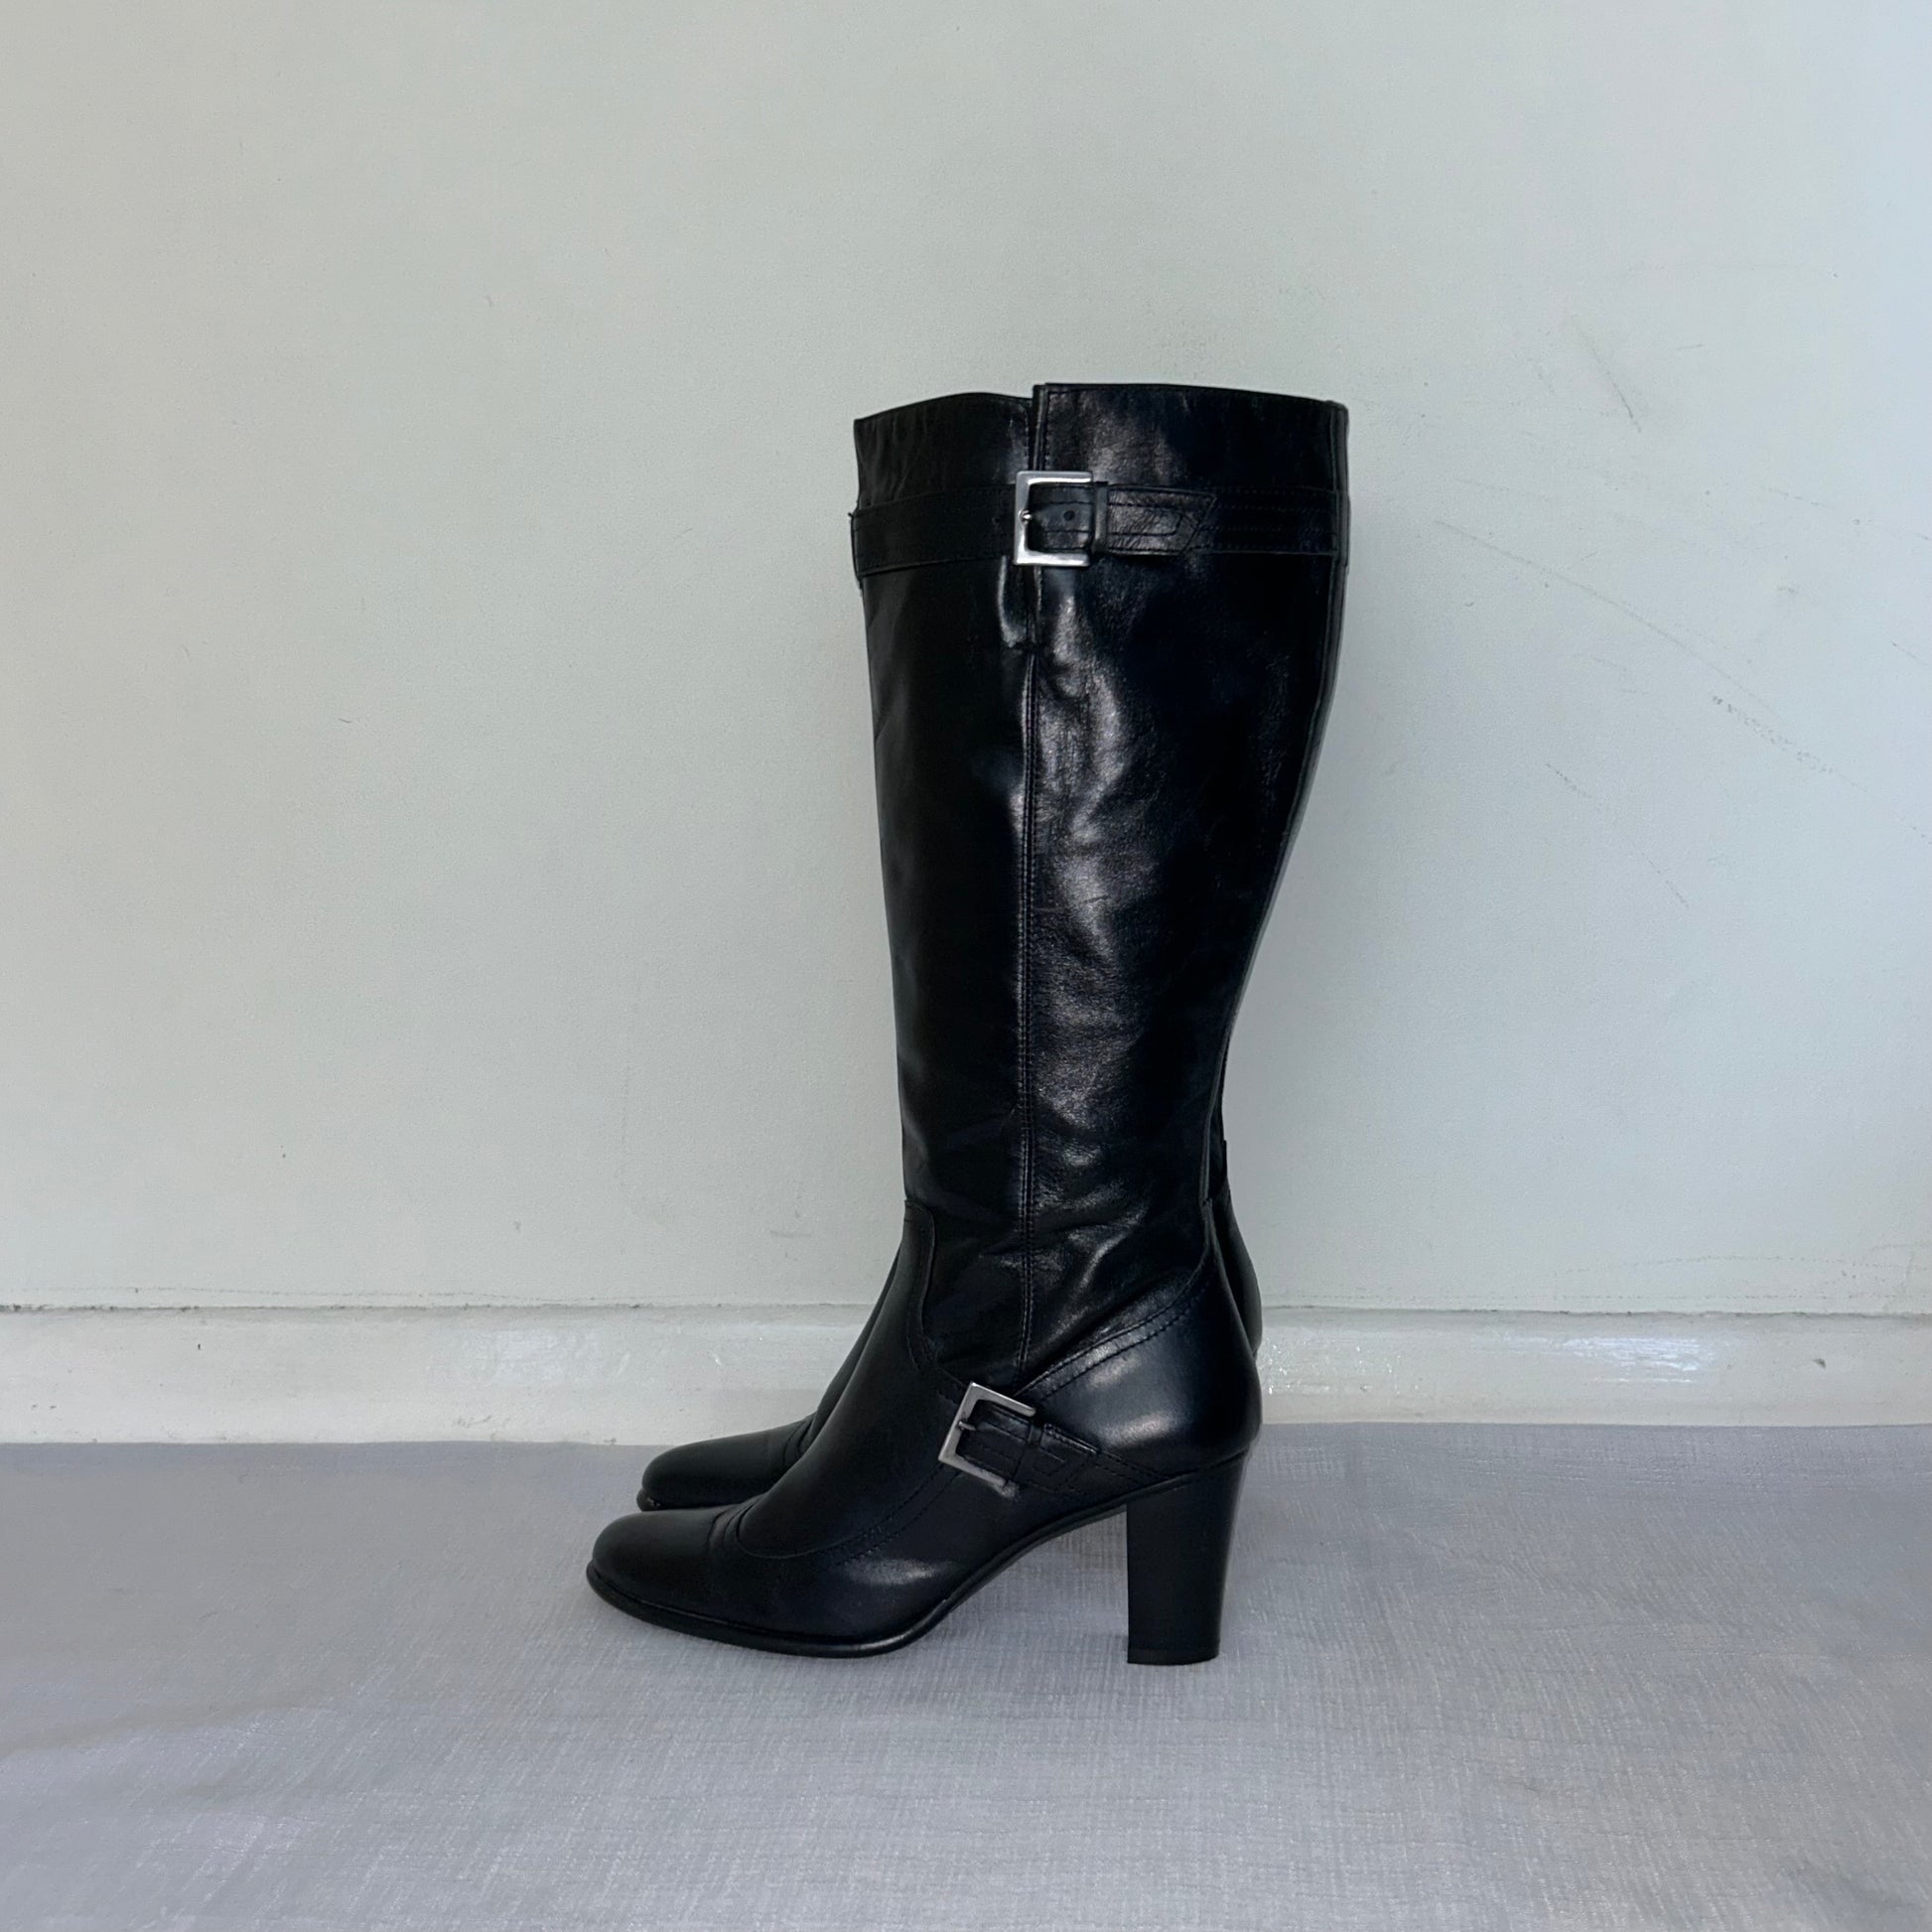 black knee high block heel leather boots shown on a white background